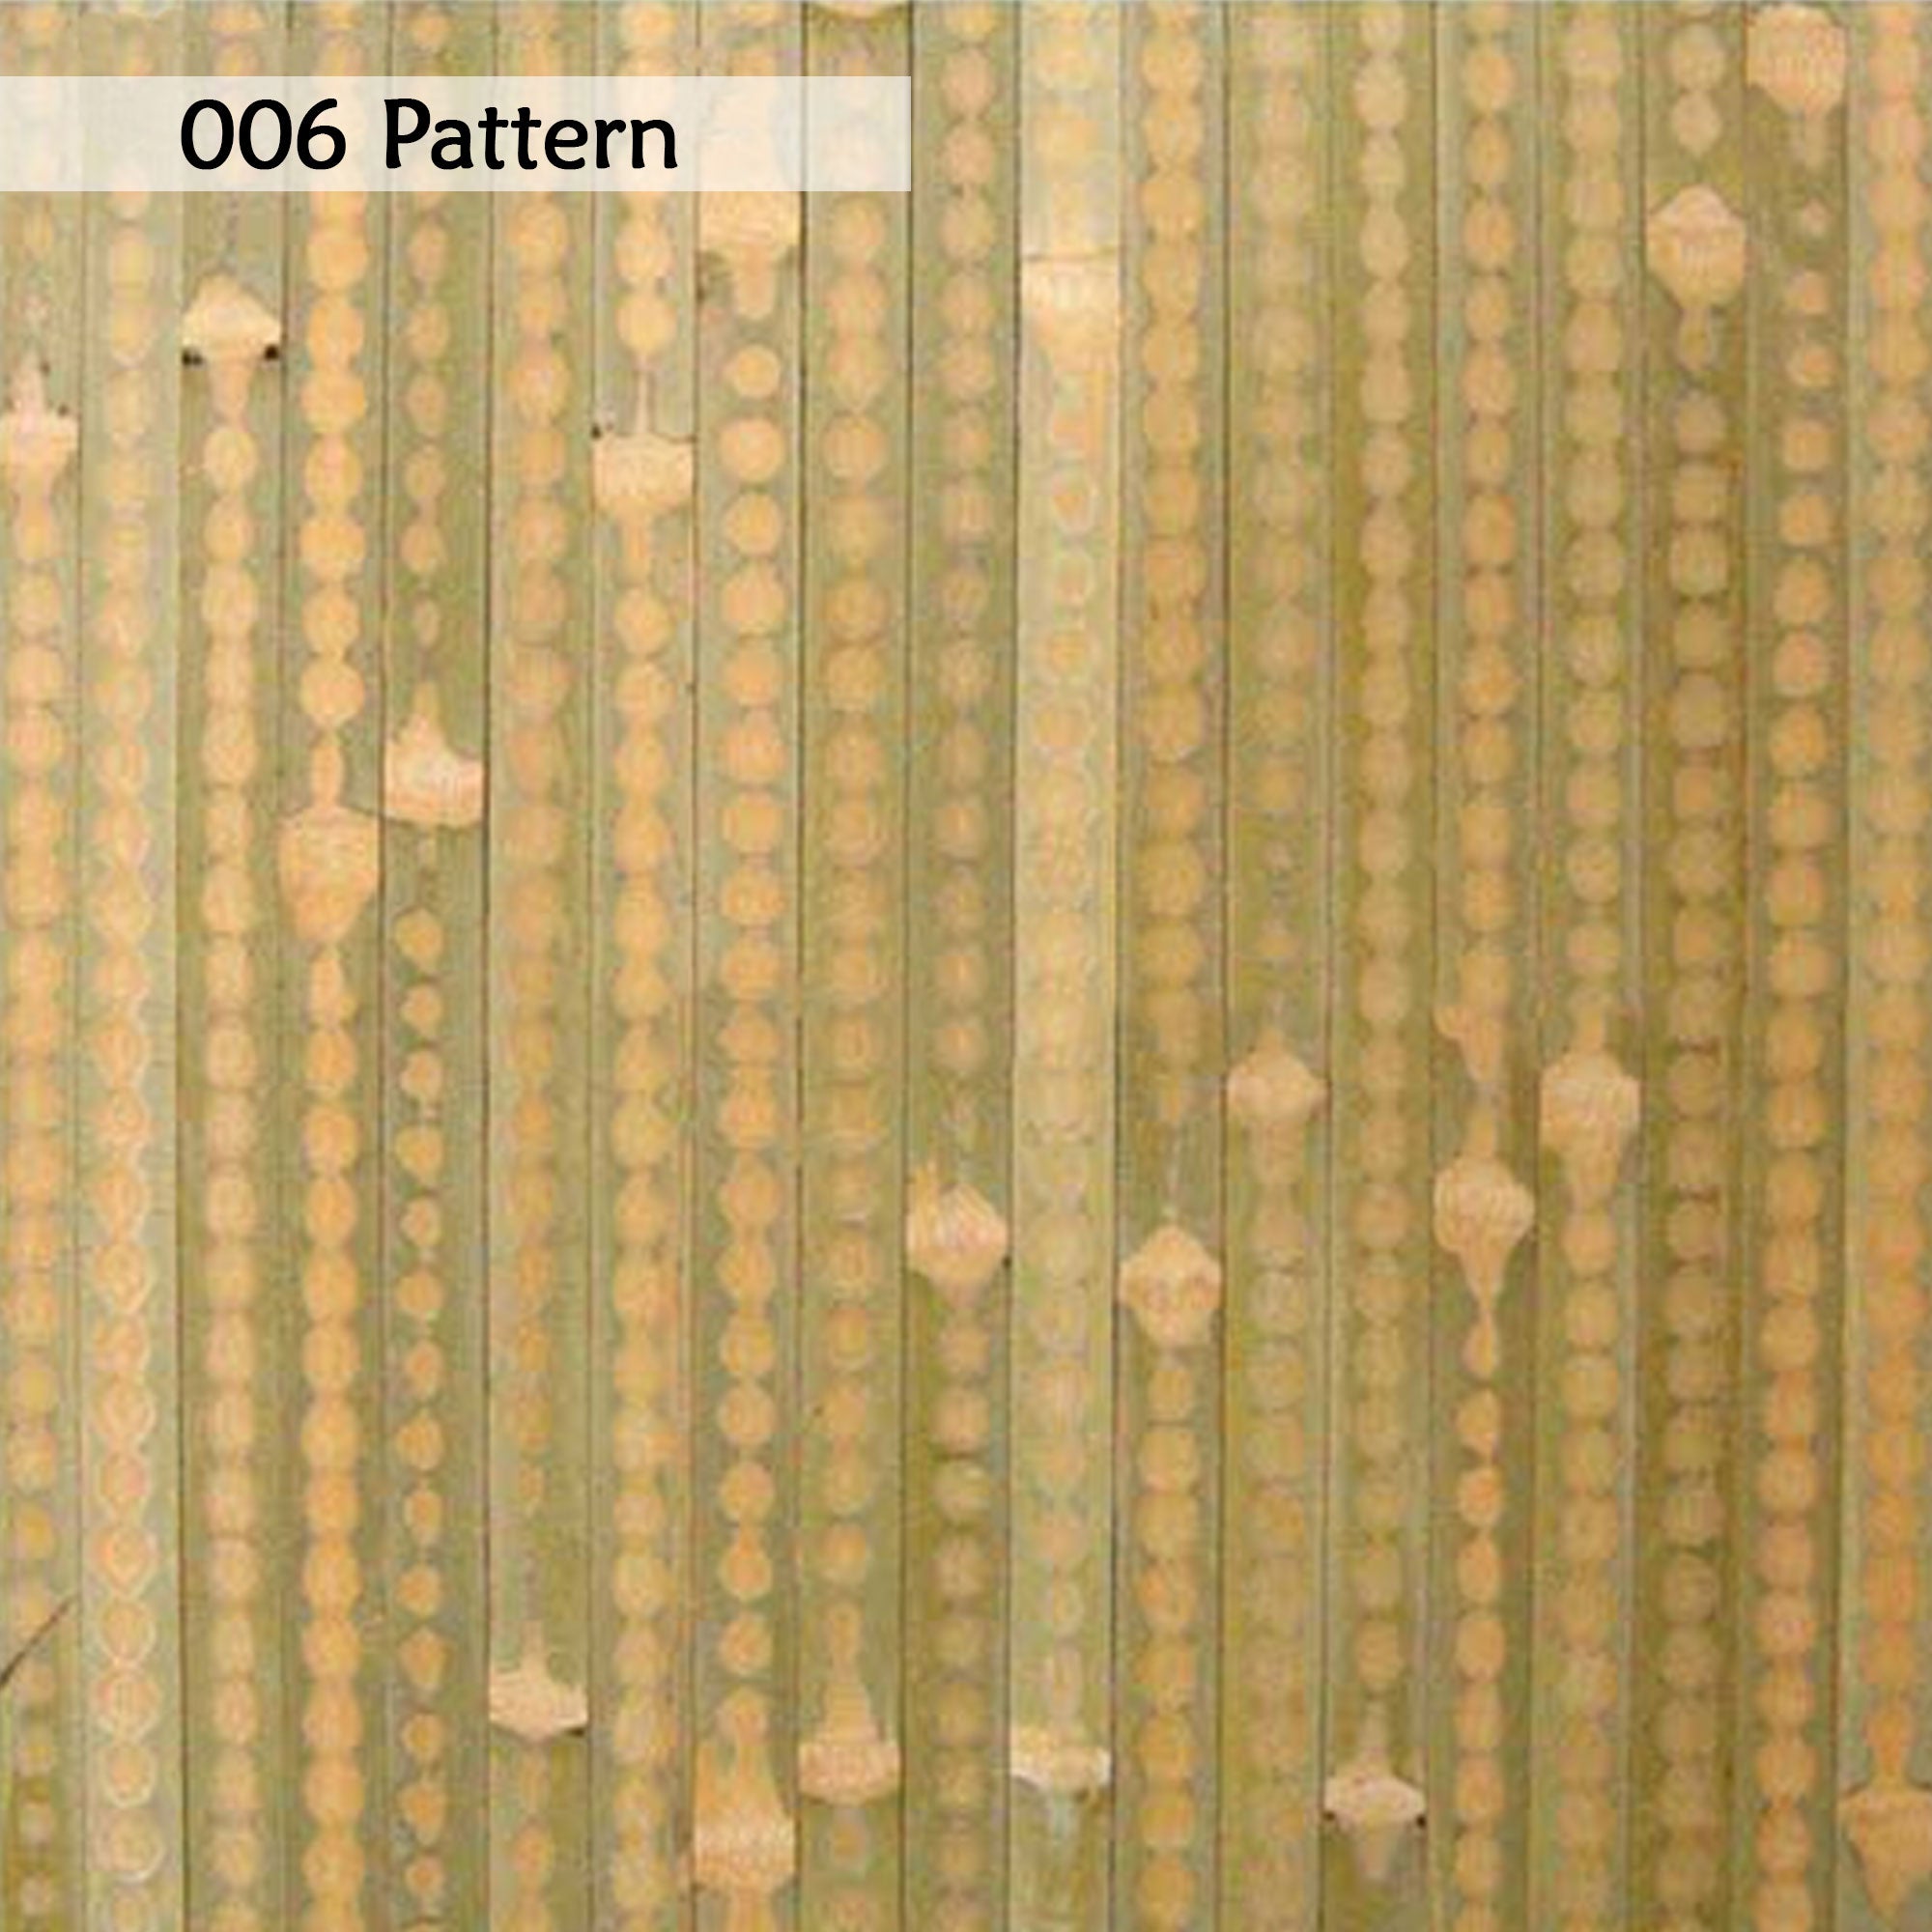 Bamboo Wall Covering/wainscoting Paneling Rolls Sold in 4x8 Rolls